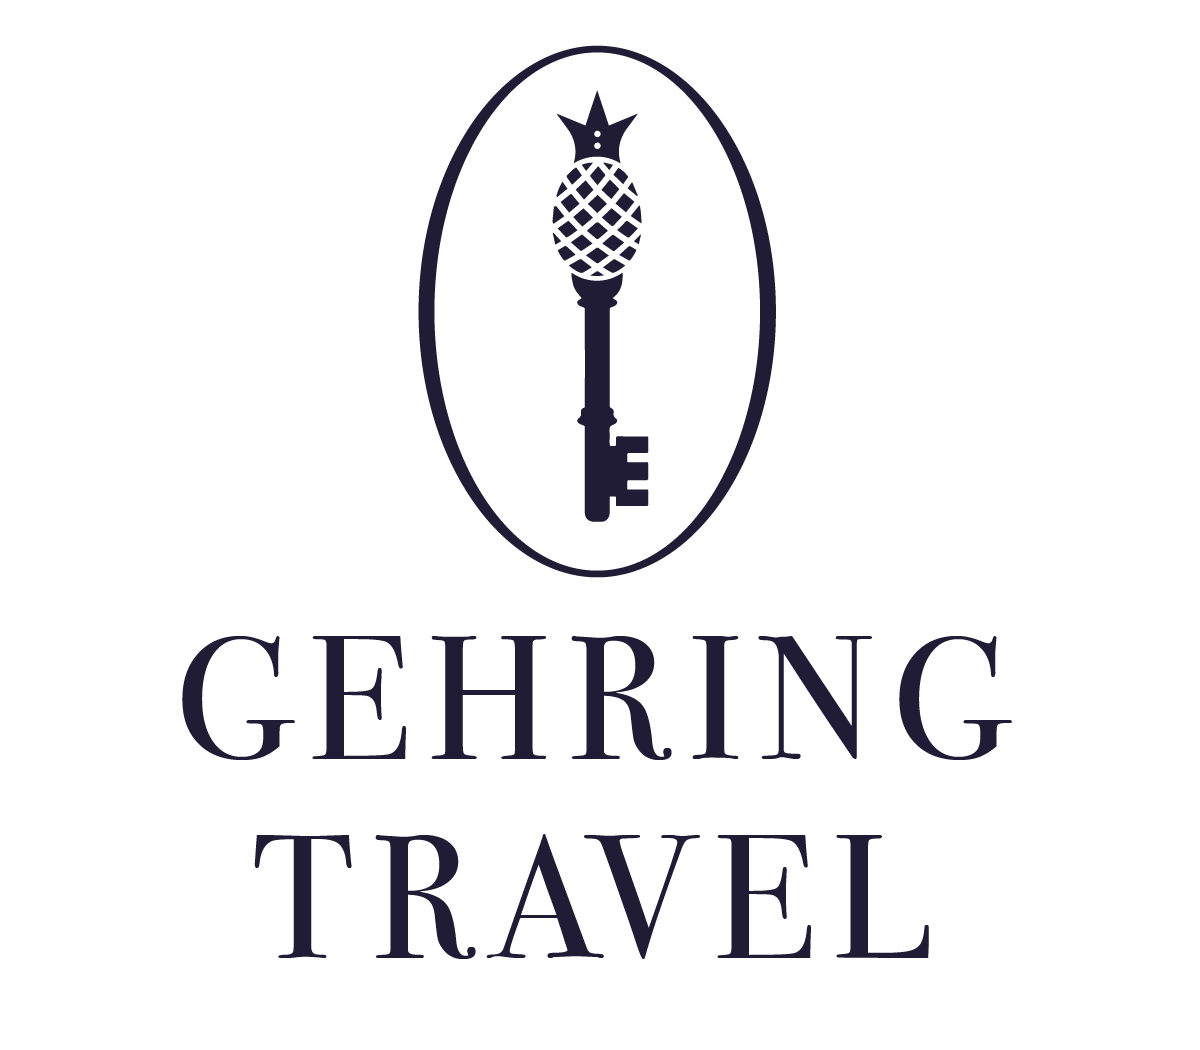 Gehring Travel: A Luxury Travel Agency